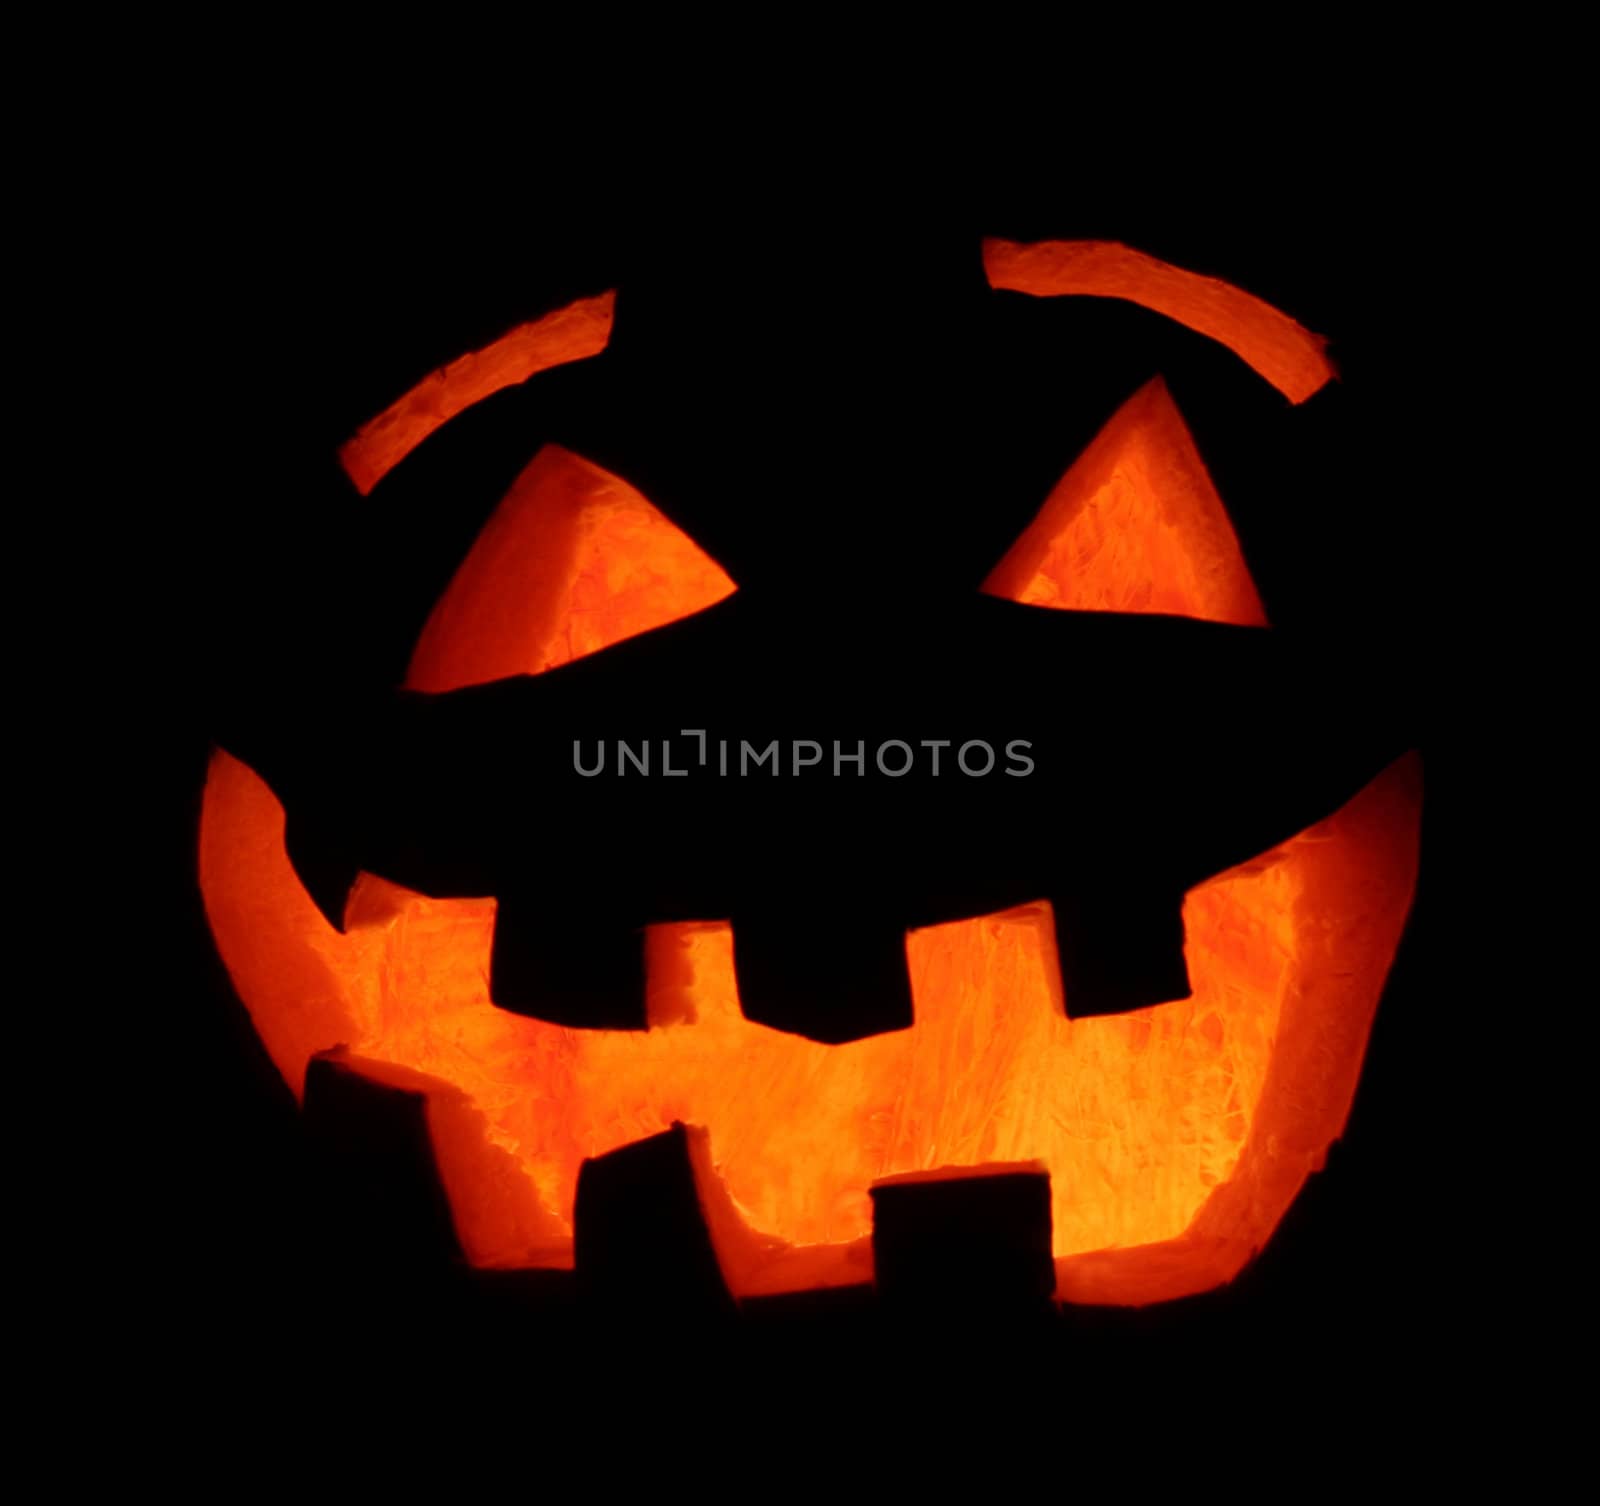 A smiling carved Halloween pumpkin face.